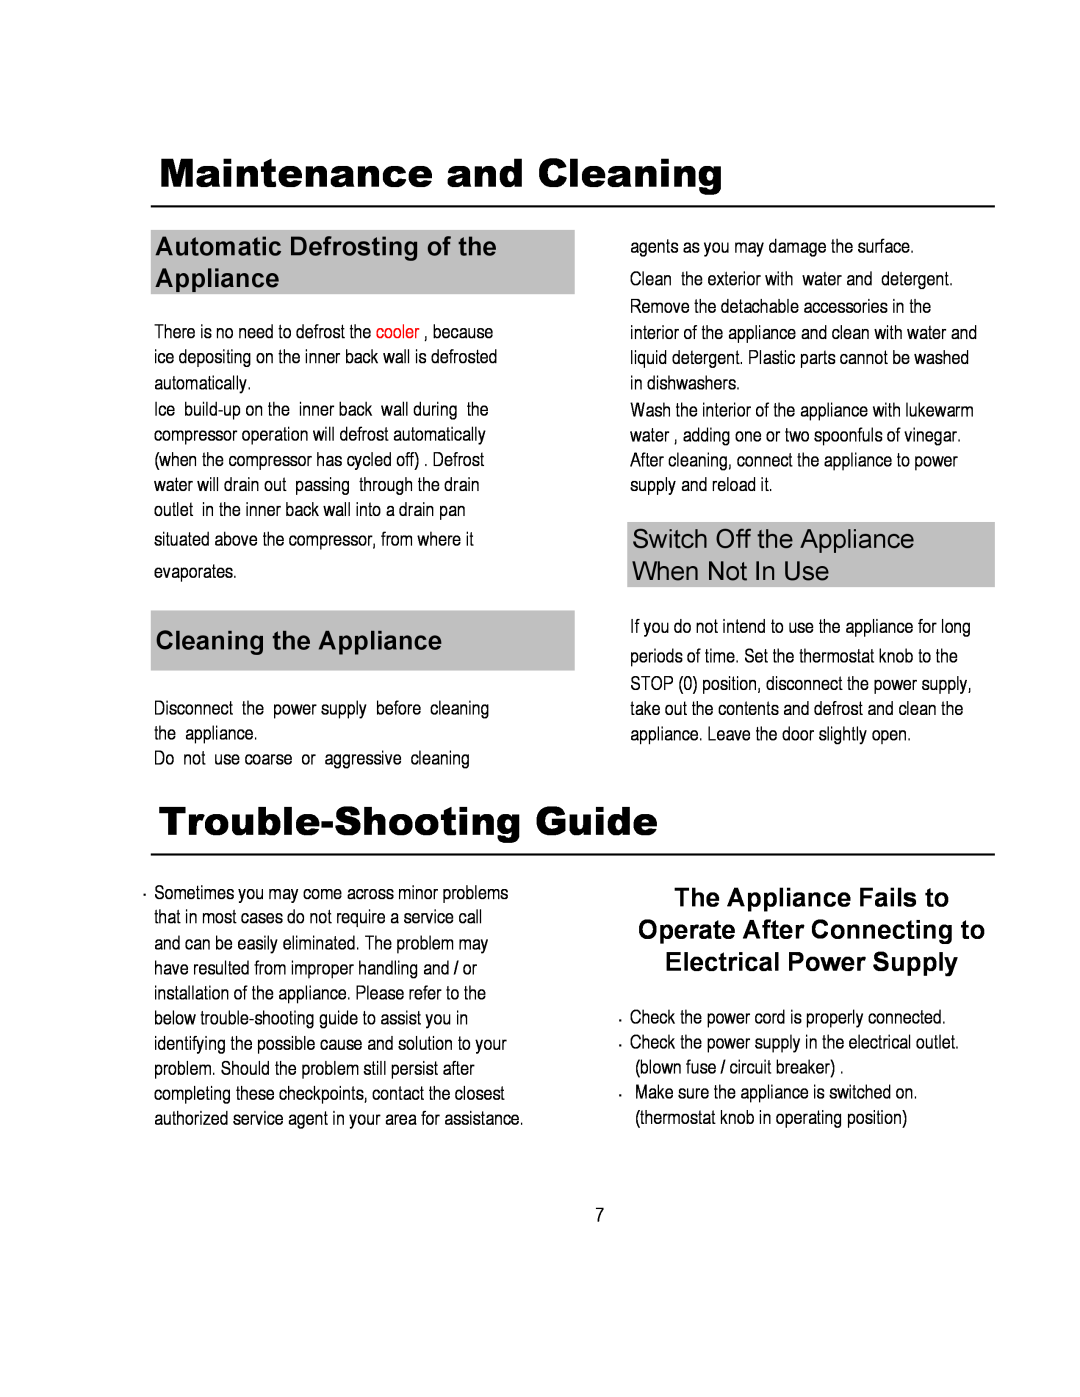 Magic Chef MCWC52B warranty Maintenance and Cleaning, Trouble-ShootingGuide, Automatic Defrosting of the Appliance 